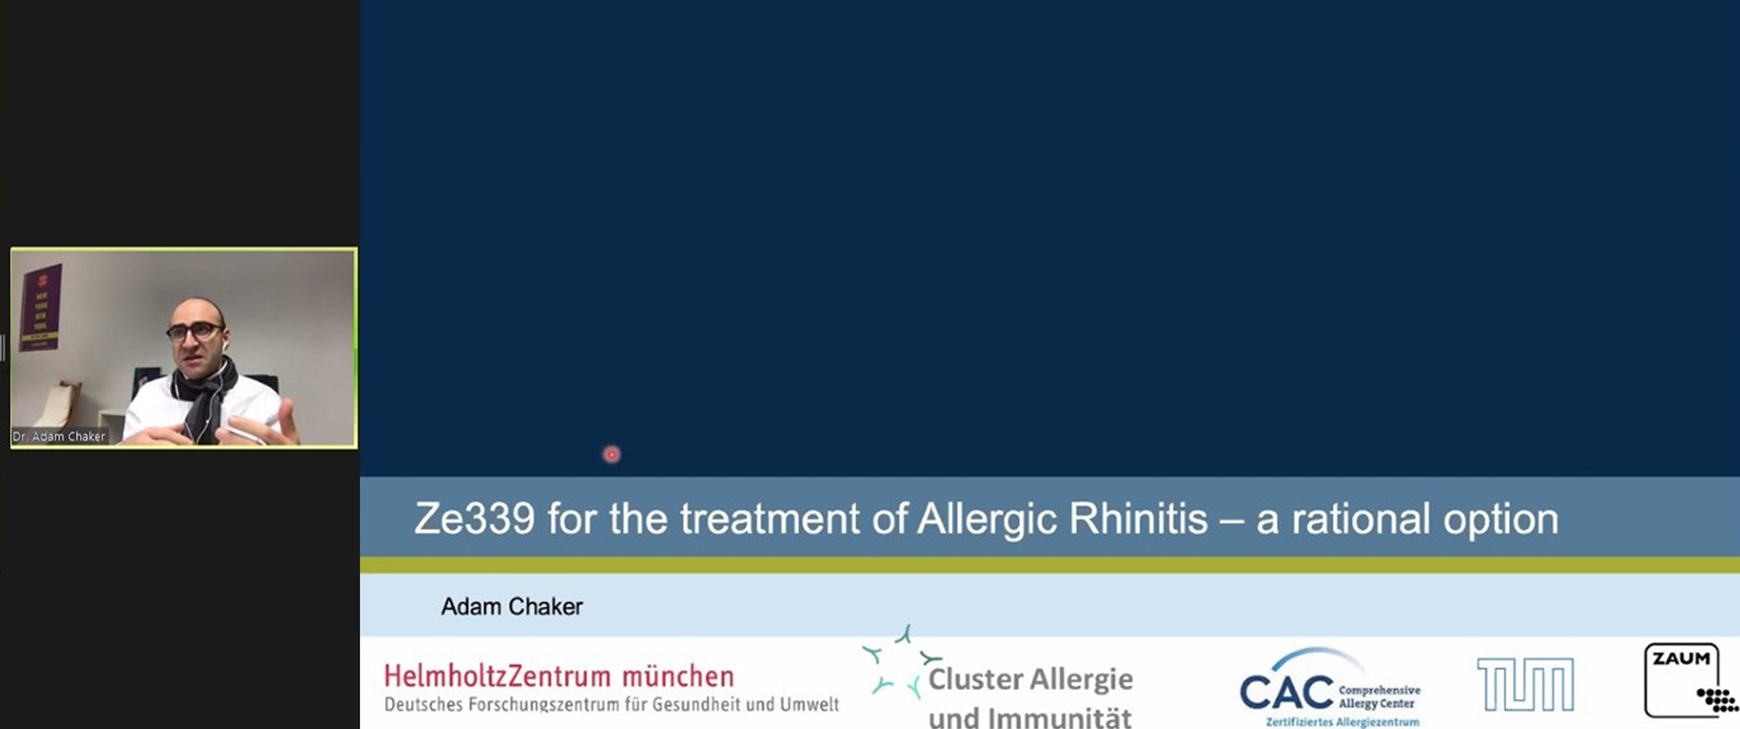 Webinar "Ze339 for the treatment of Allergic Rhinitis - a rational option"